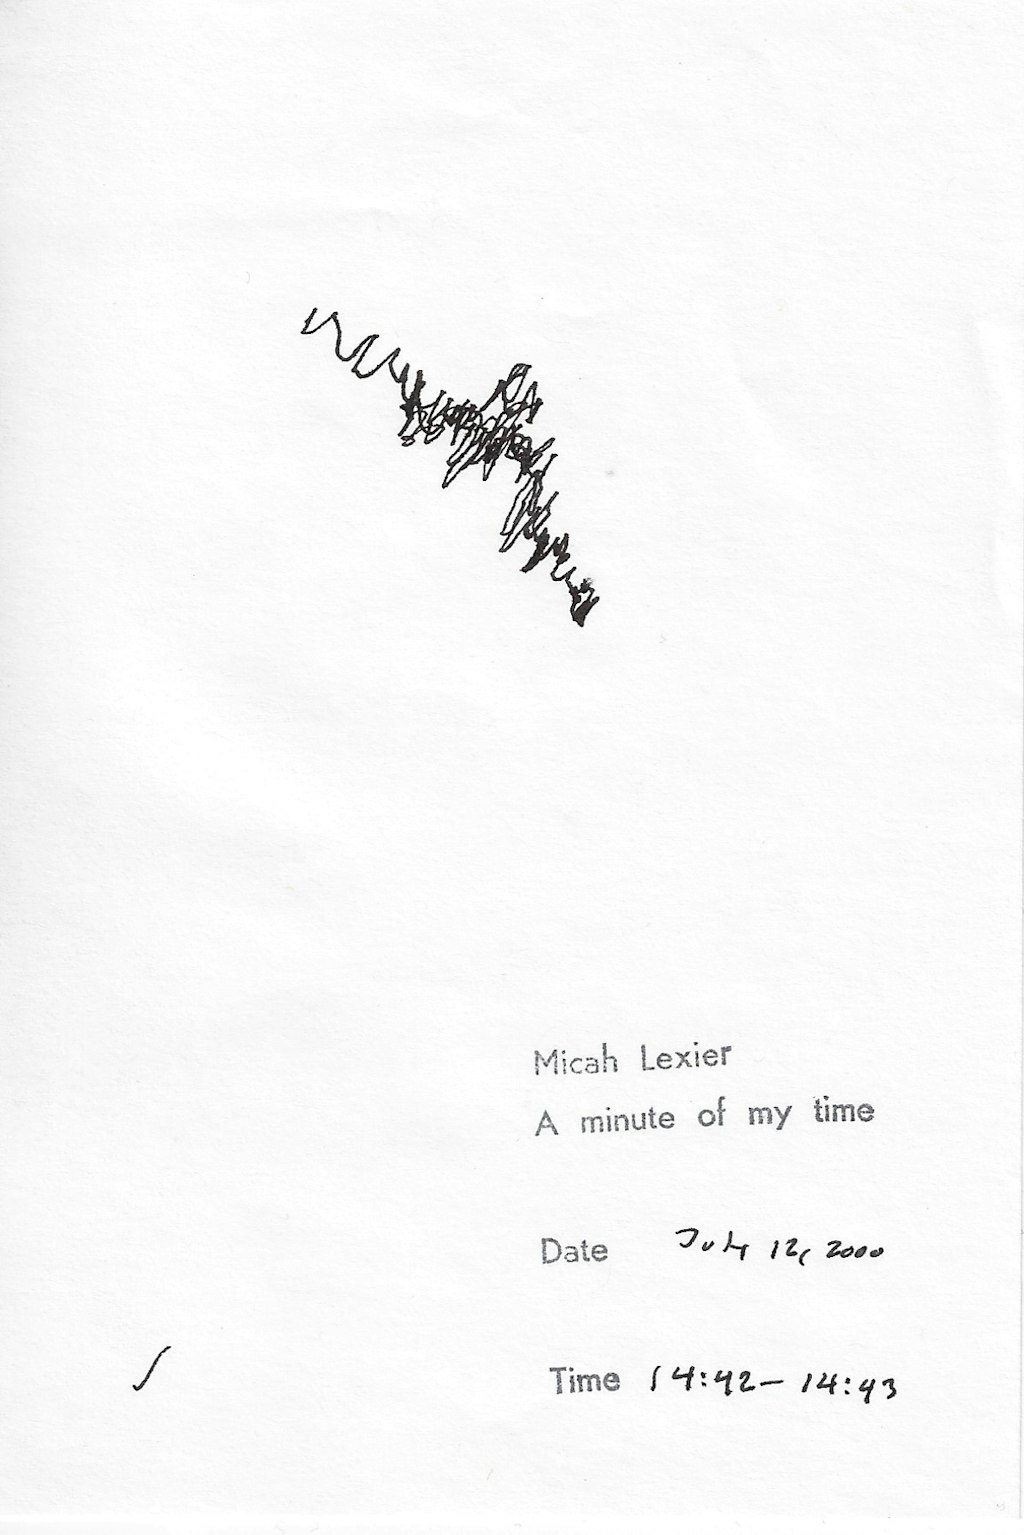 The drawing Micah Lexier used for his work [w:8.2019[A minute of my time (July 12, 2000 14:42–14:43)]] 2000, Art Gallery of New South Wales © Micah Lexier